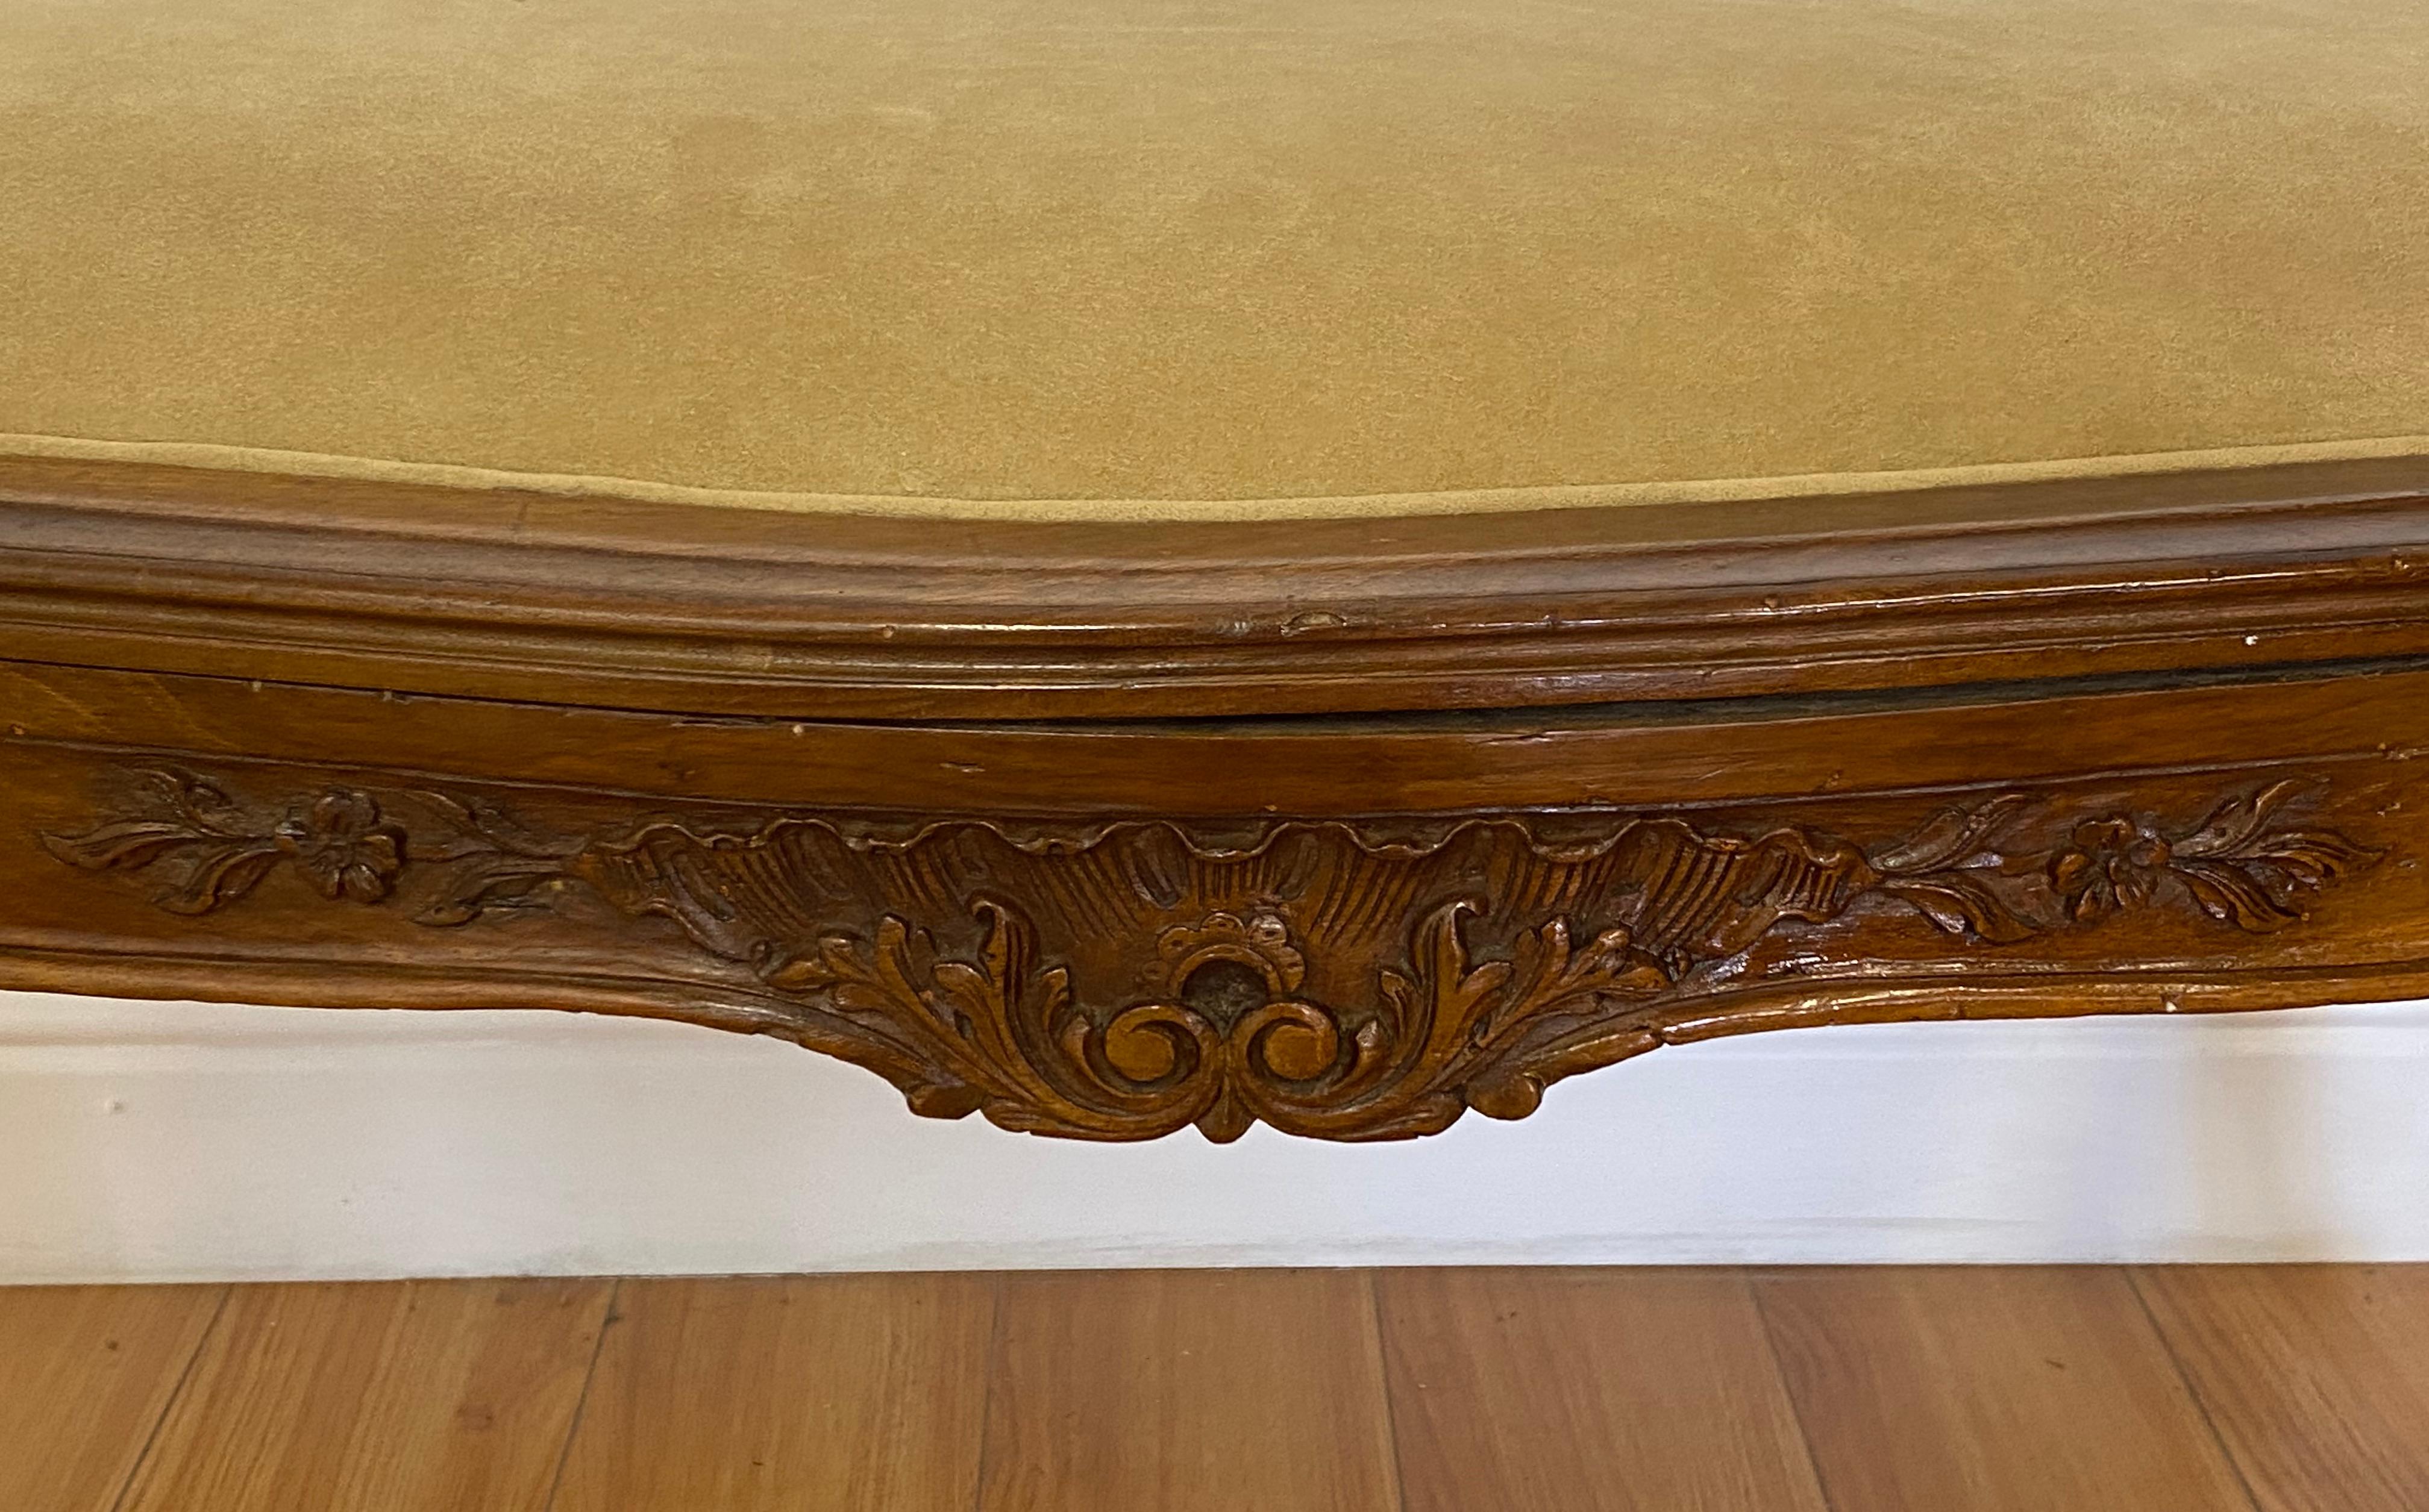 Early 20th century hand carved French walnut bench c.1900

Remnants of the original wicker seat are still visible underneath. The new seat appears to be added in the mid 20th century.

The frame shows some all around distress and some lifting at